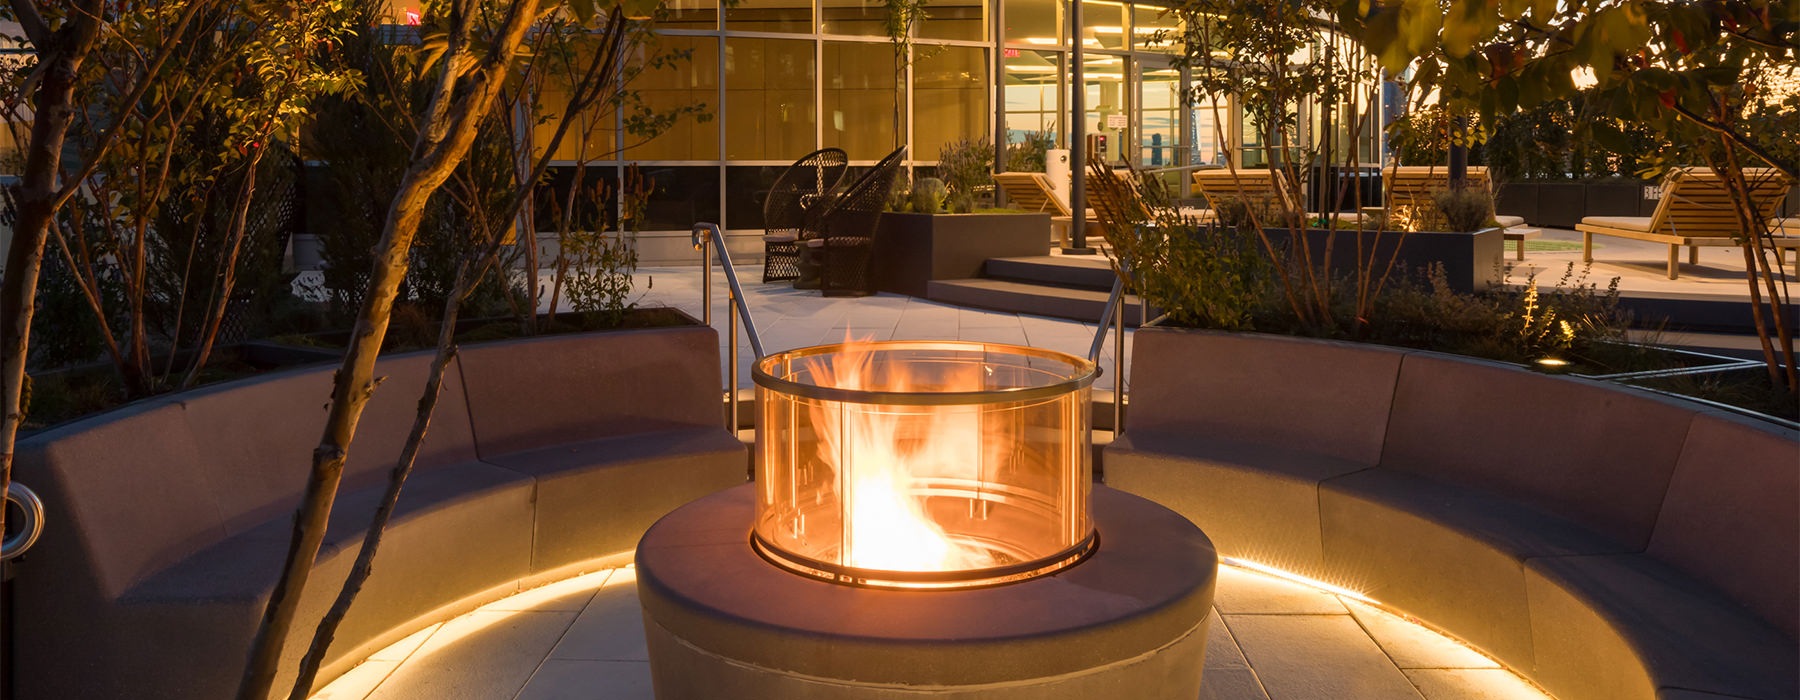 Rooftop Fire Pit at night